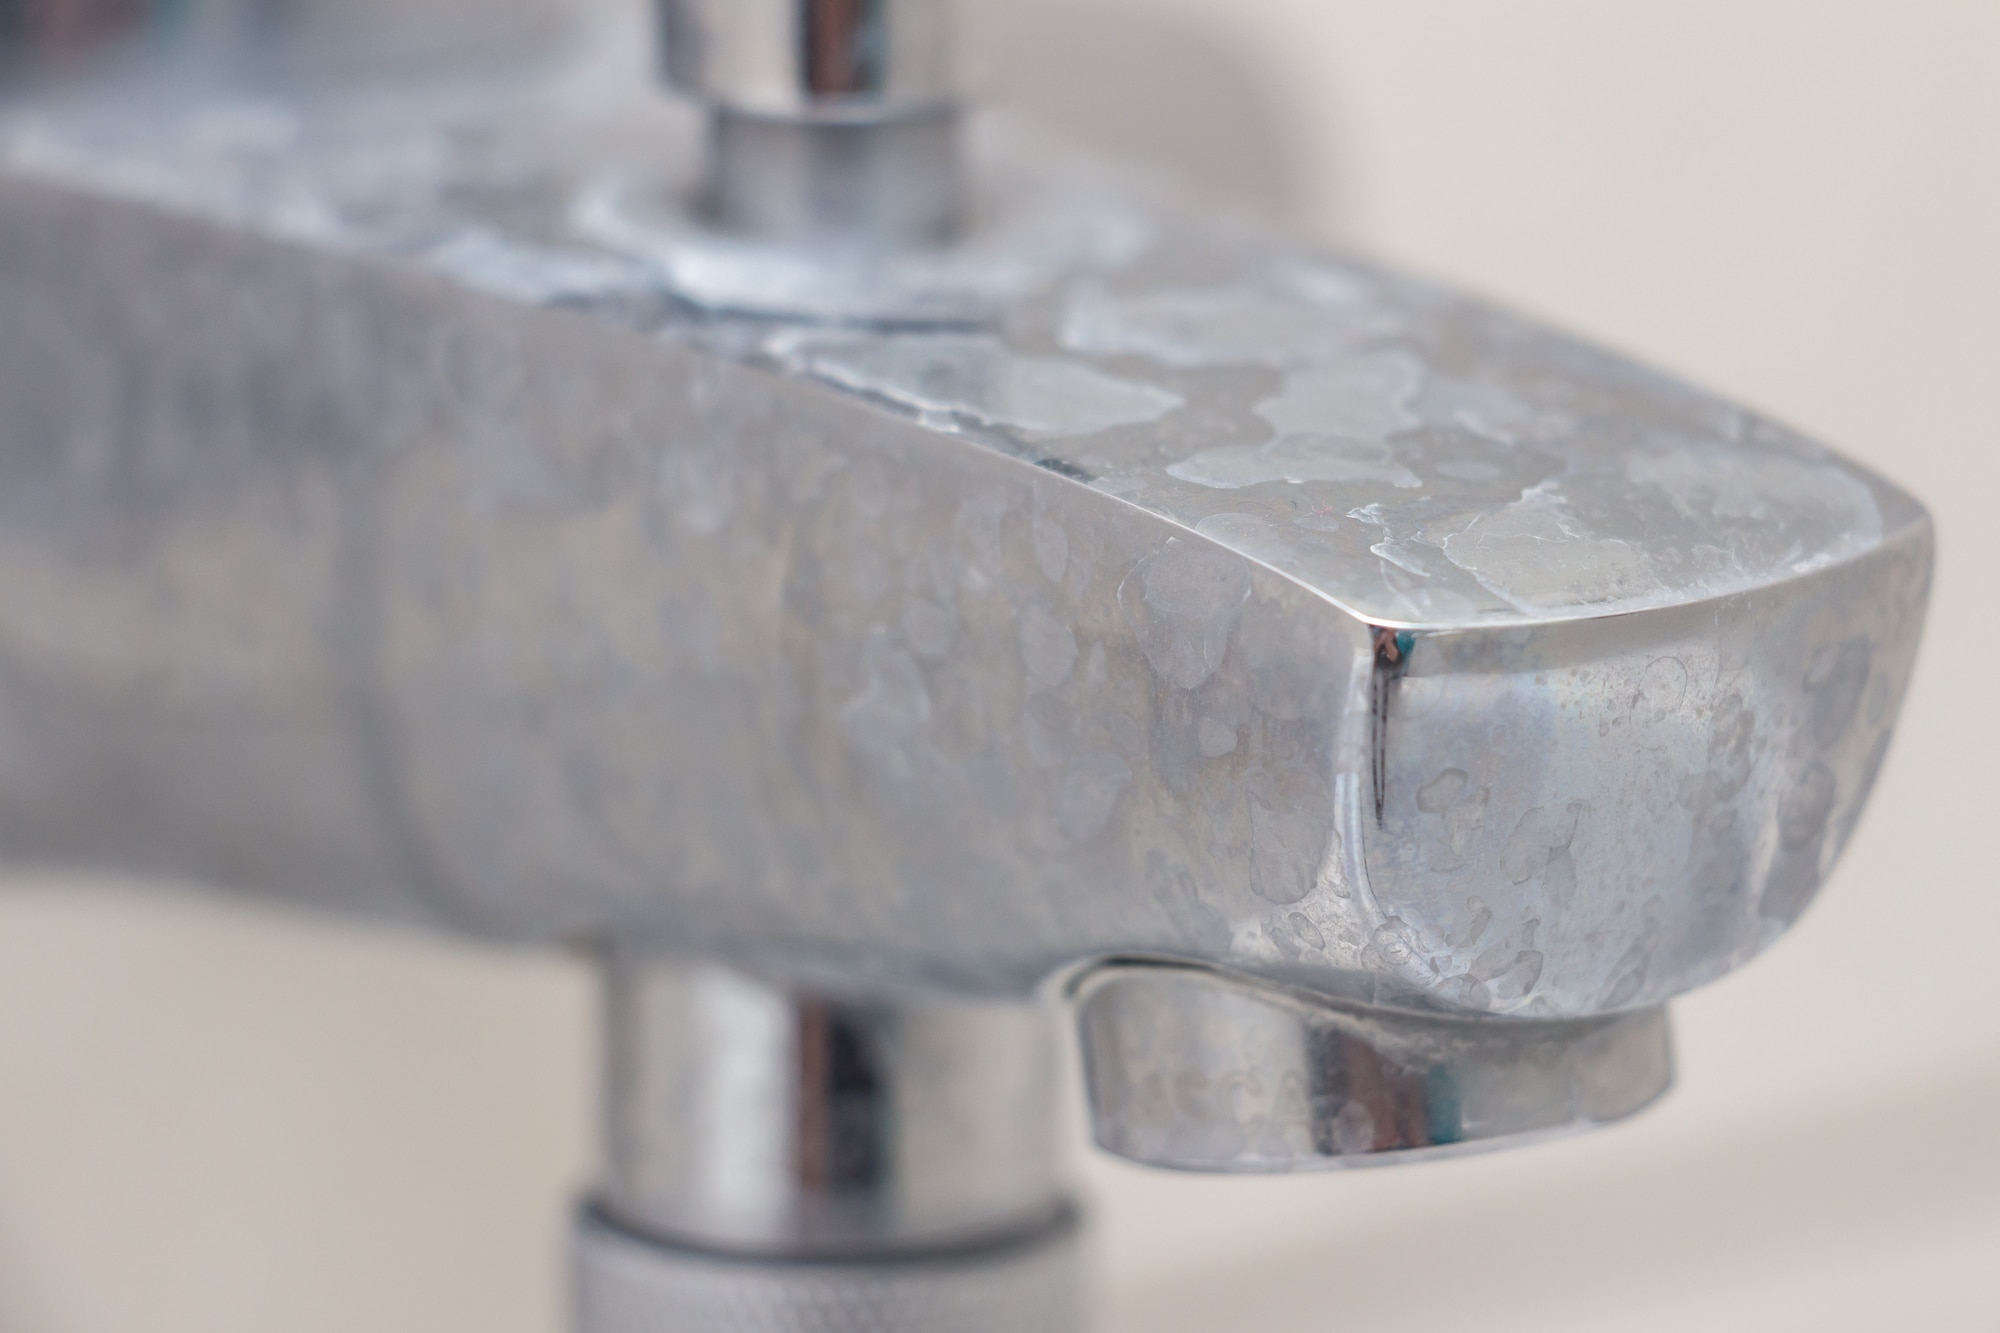 The Essential Guide to Understand Your Plumbing System